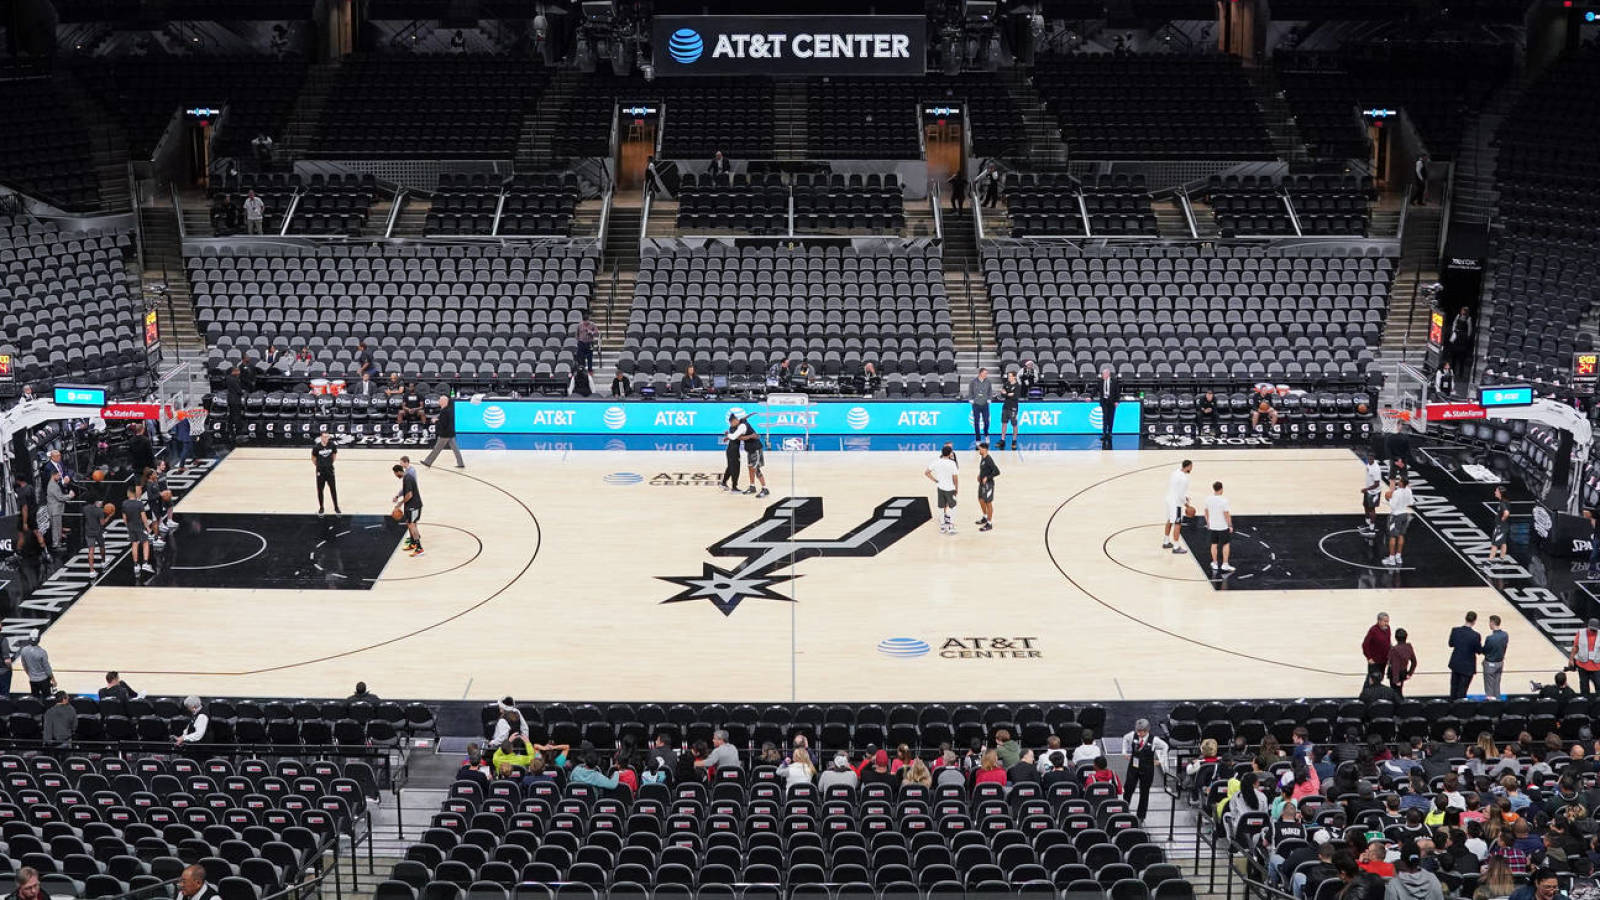 Home Stadium of NBA Spurs, AT&T Center One AT&T Center Park…